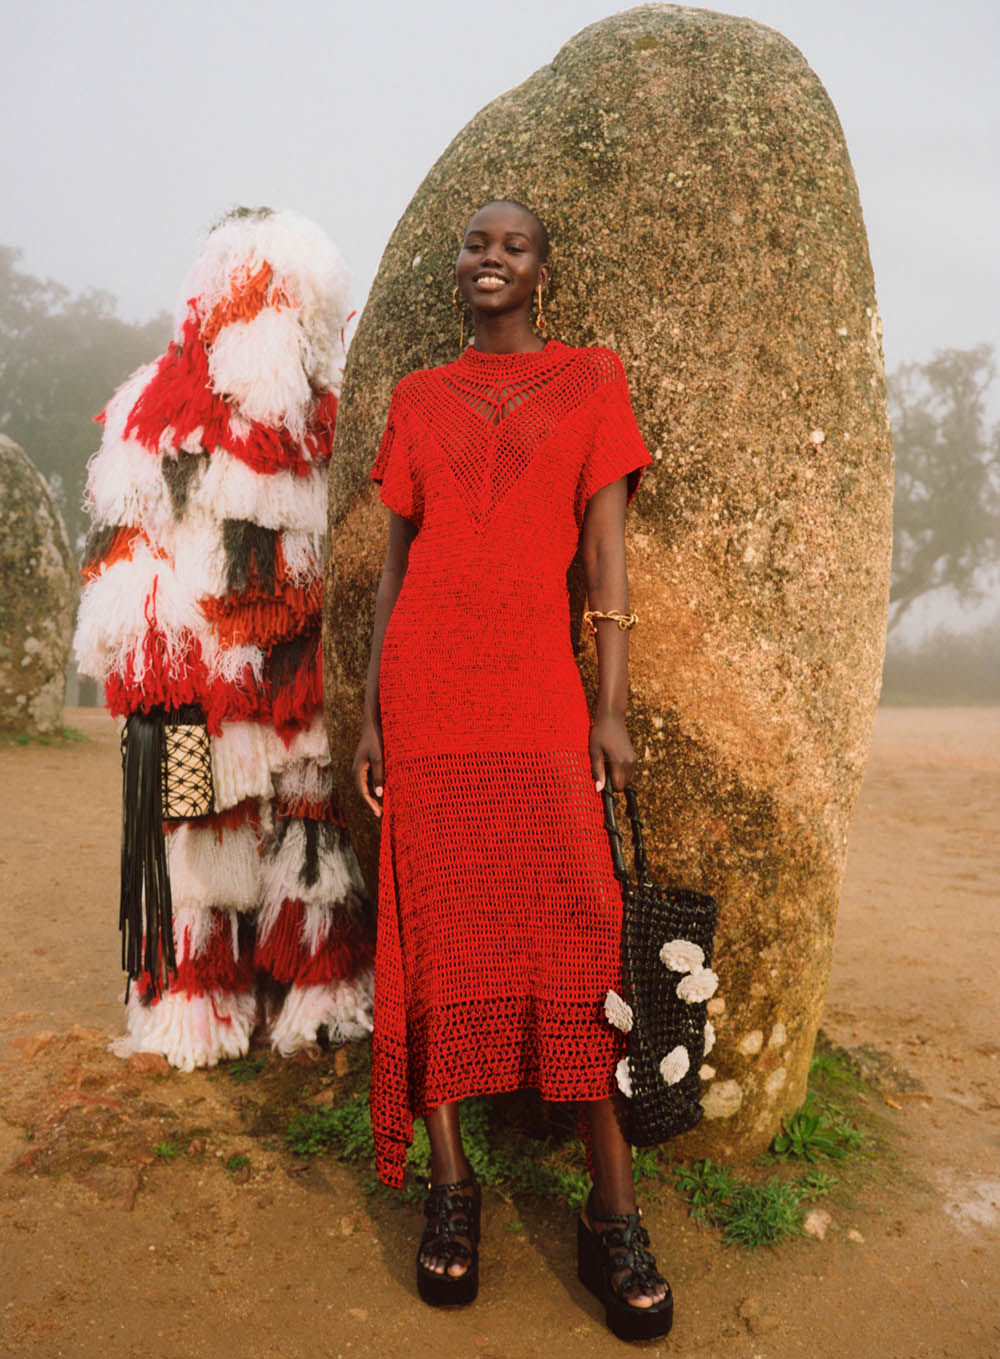 Adut Akech and Abby Champion by Angelo Pennetta for Vogue US April 2020